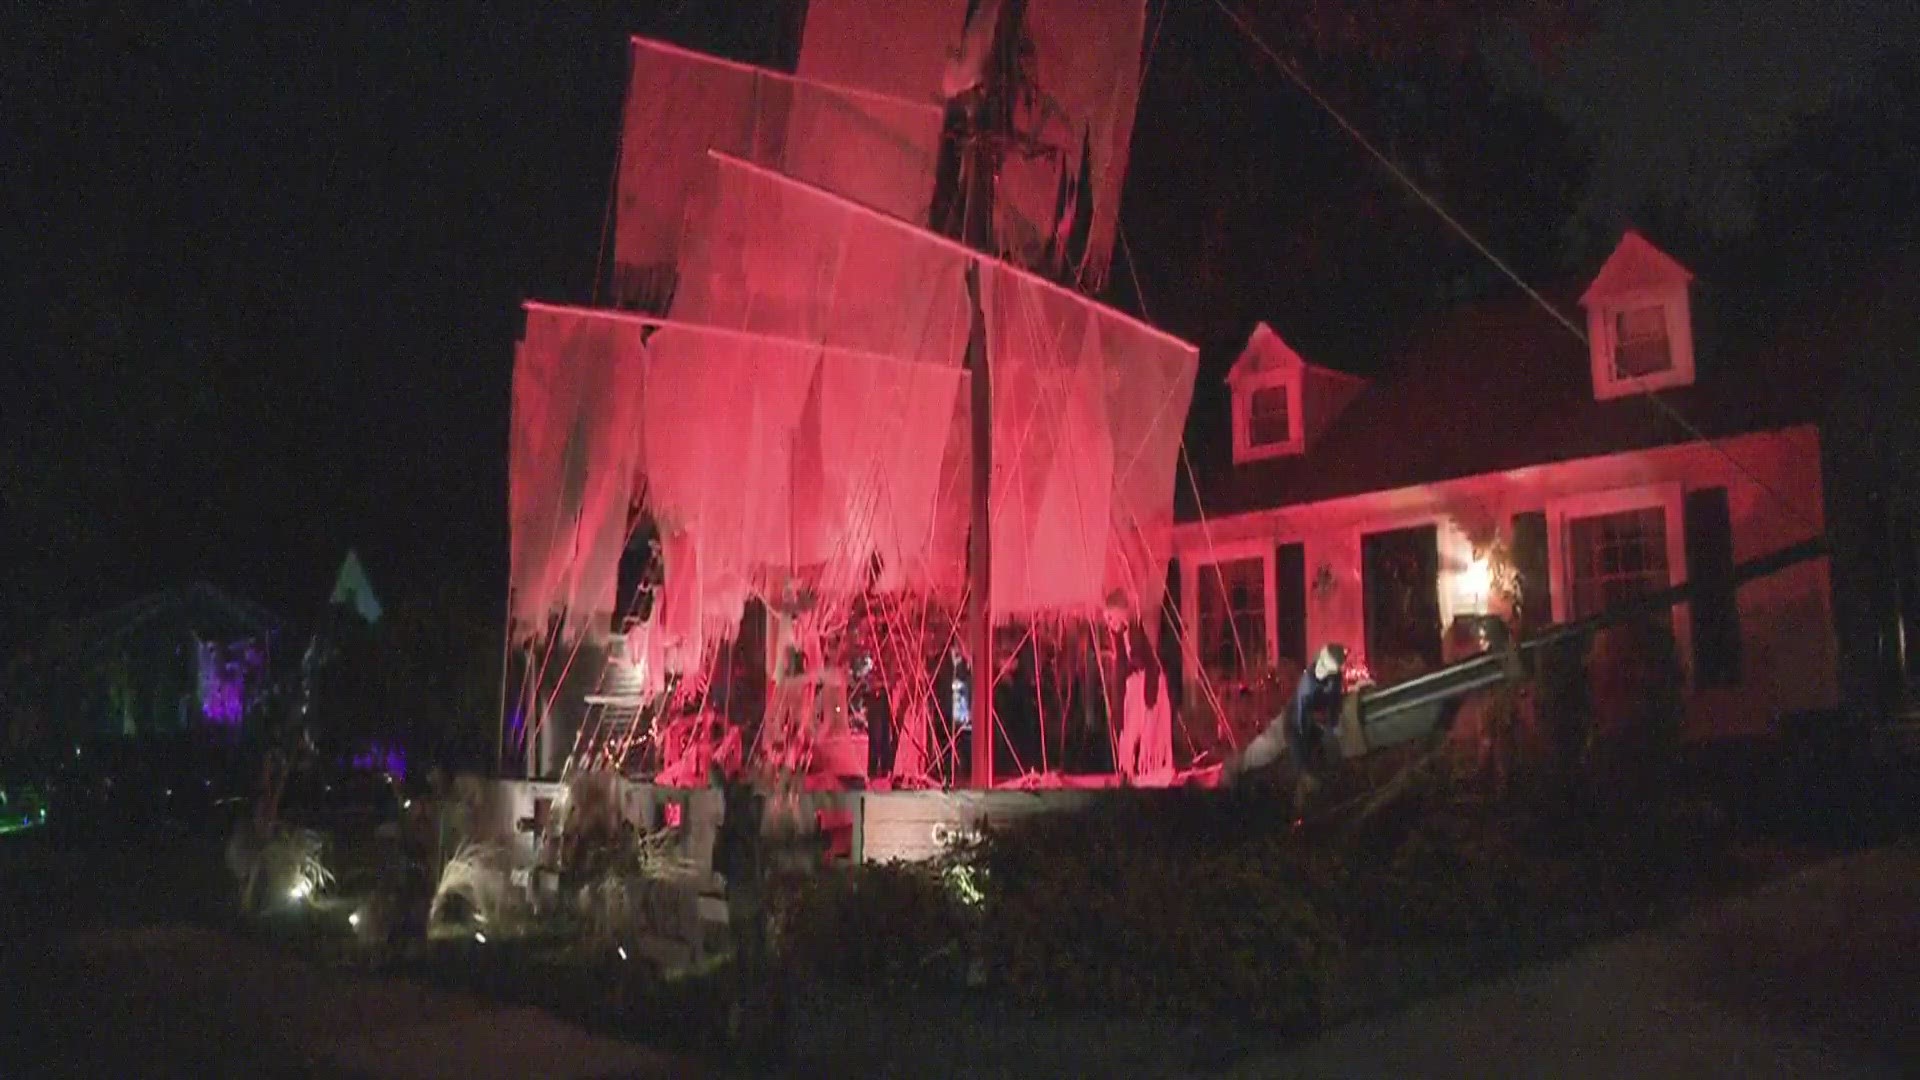 Check this out! Ray Kent, who says he's the secretary of the Cleveland Haunt Club, has unleashed this incredible Halloween display in Bay Village.